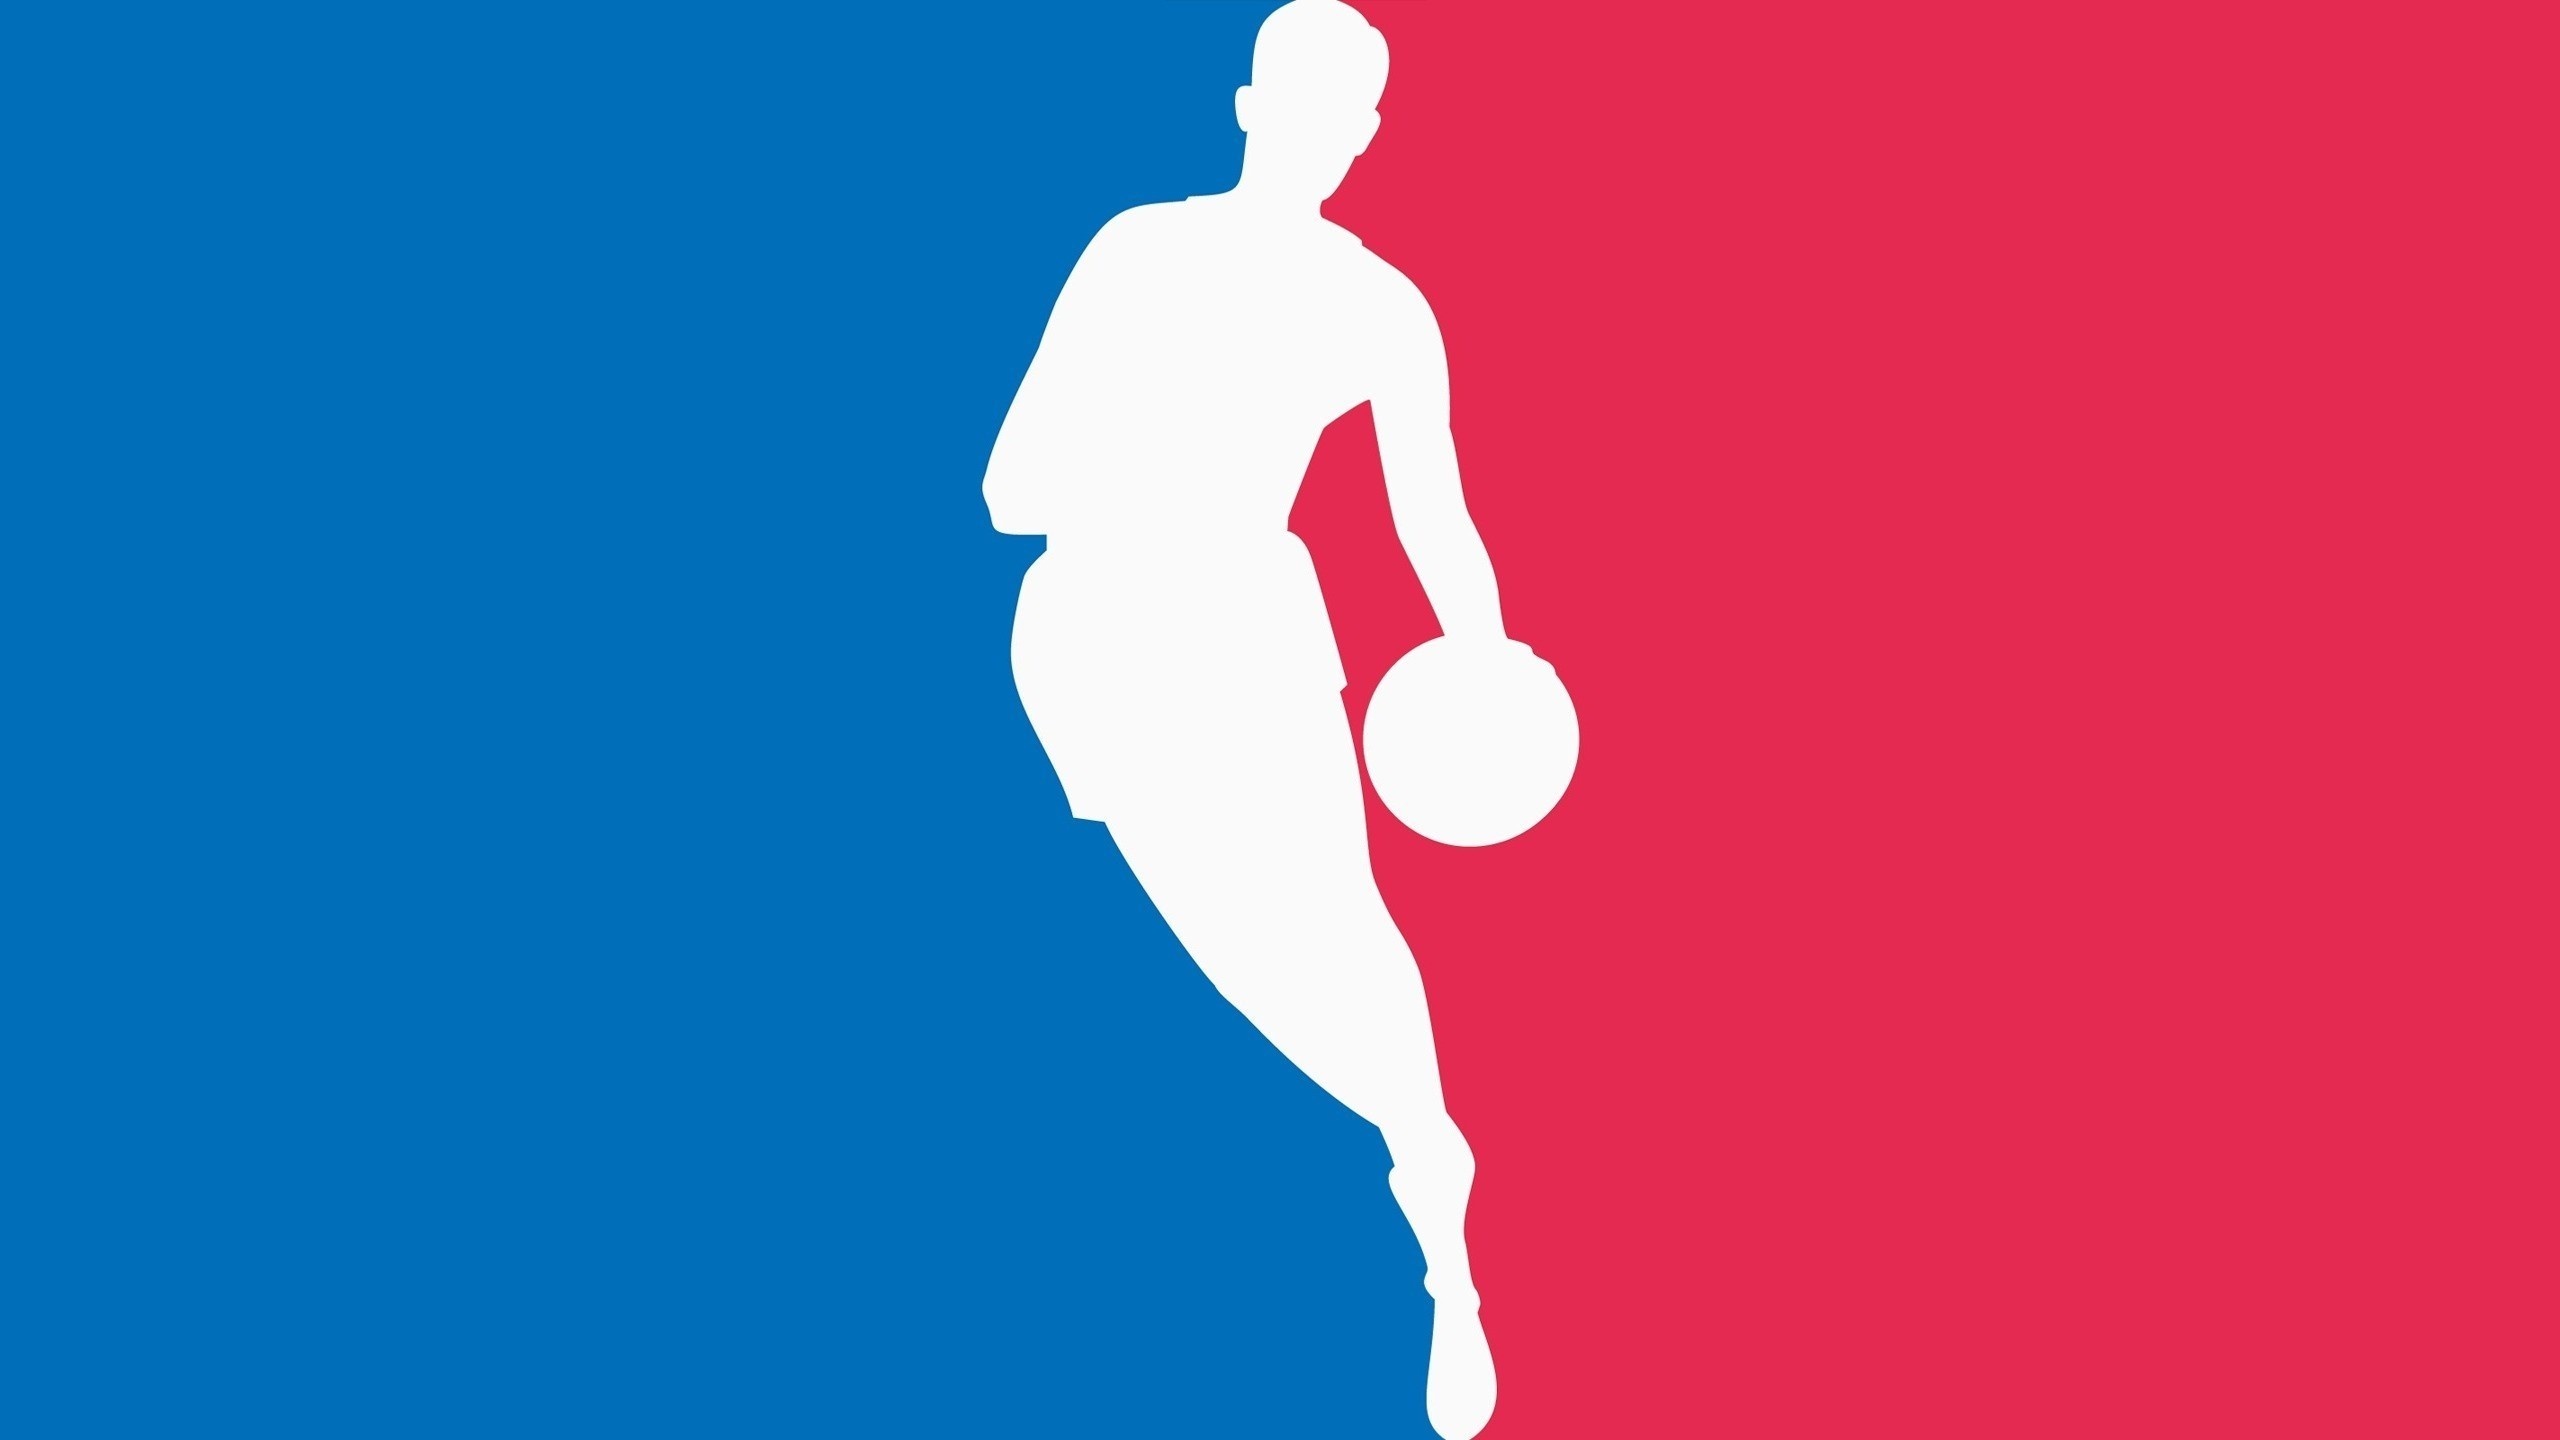 NBA basketball wallpapers, Stunning visuals, High quality images, Sports photography, 2560x1440 HD Desktop